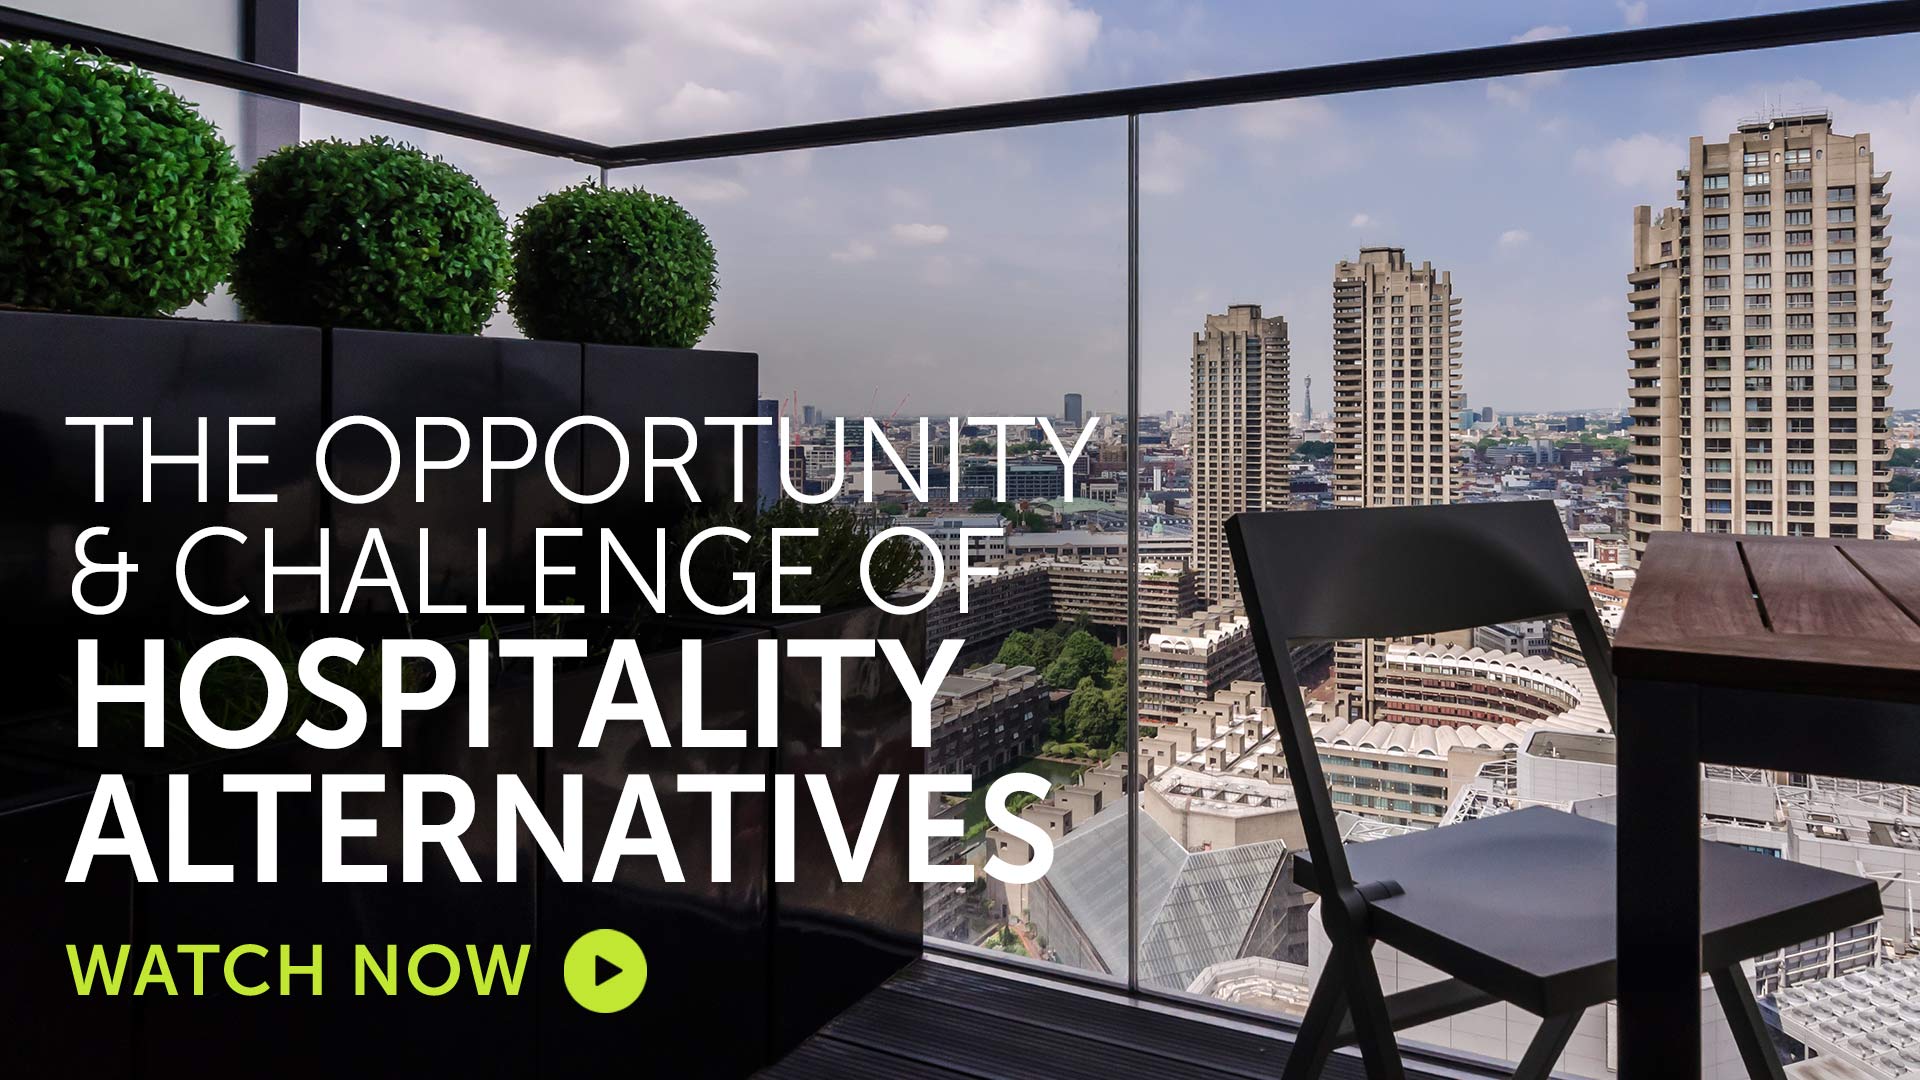 Briefing: The opportunity and challenge of hospitality alternatives